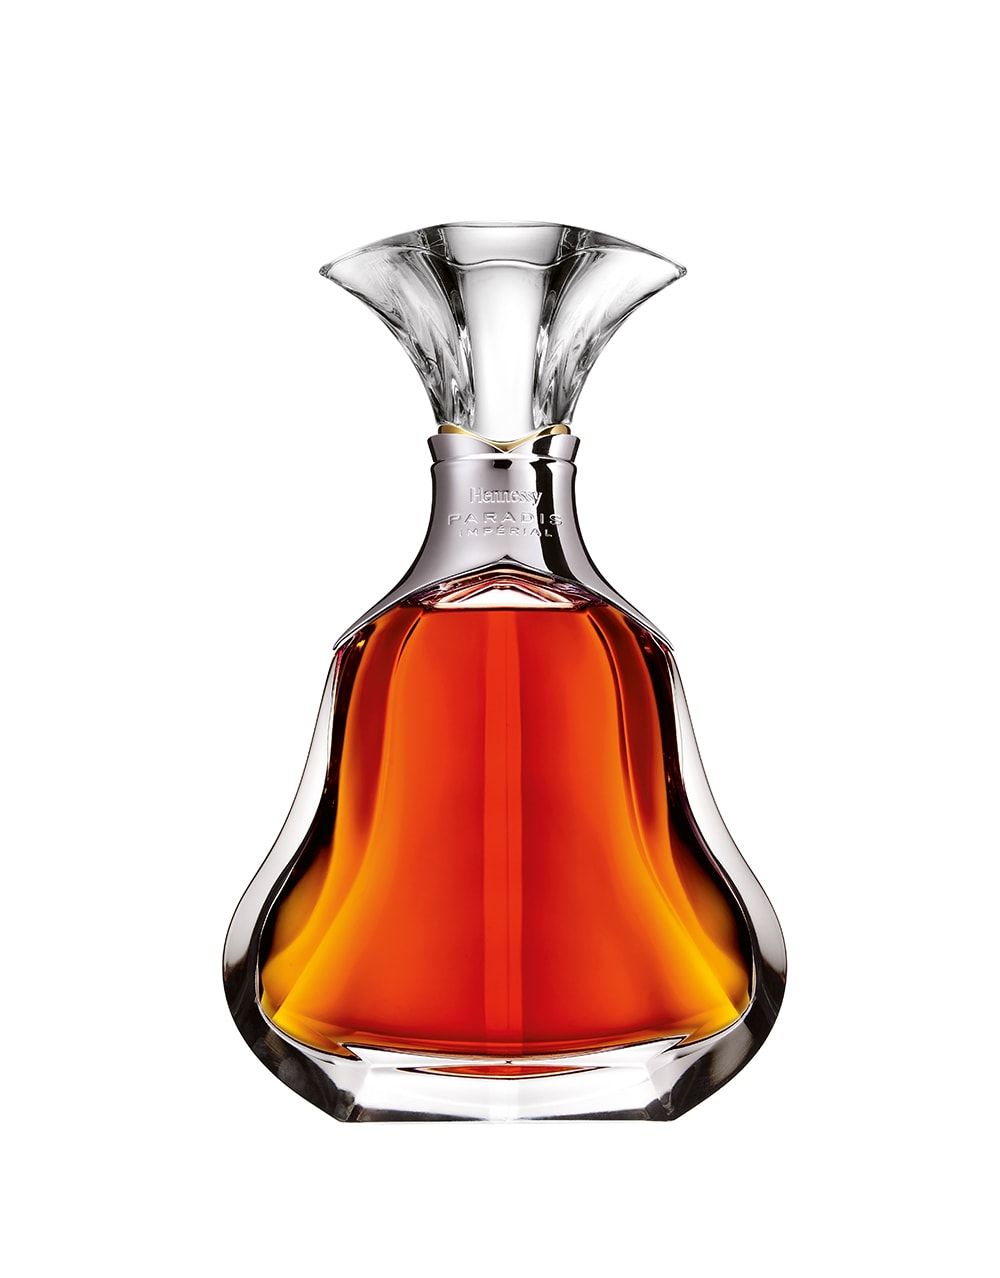 Hennessy Paradis Imperial - Lot 32800 - Buy/Sell Glassware & Ceramics Online